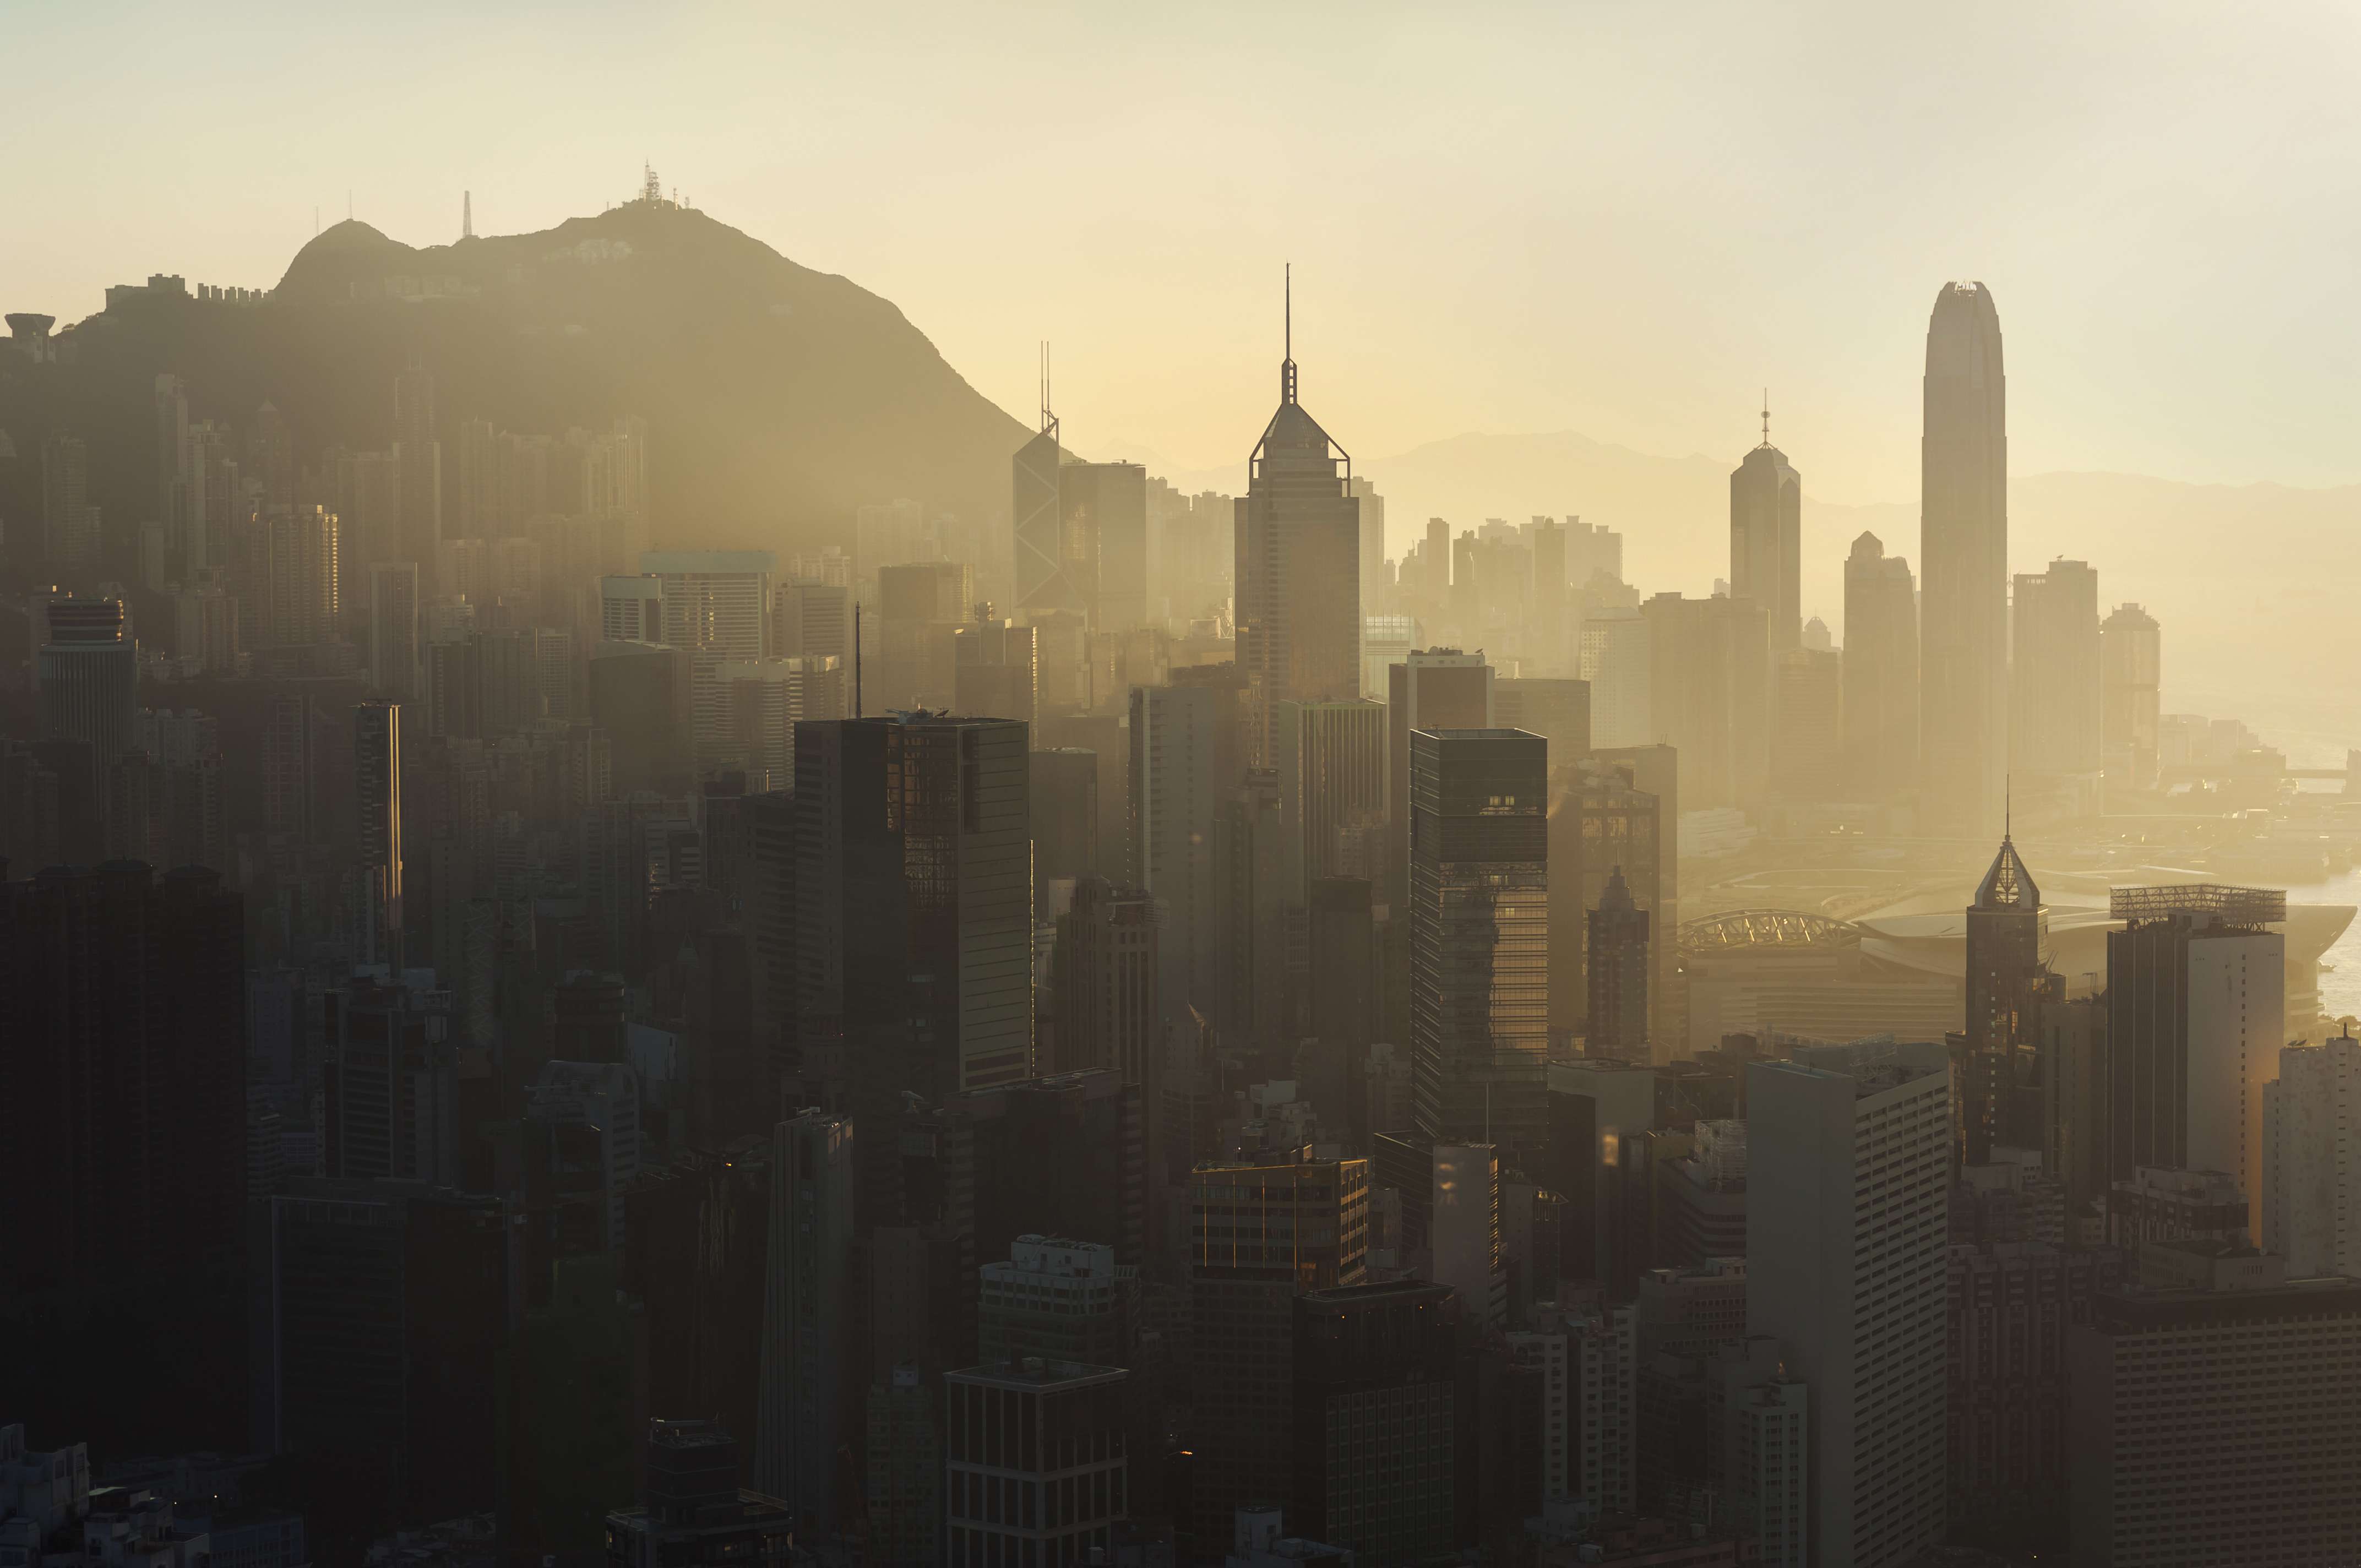 Hong Kong’s pollution is a major problem for the city’s asthmatics. Photo: Shutterstock